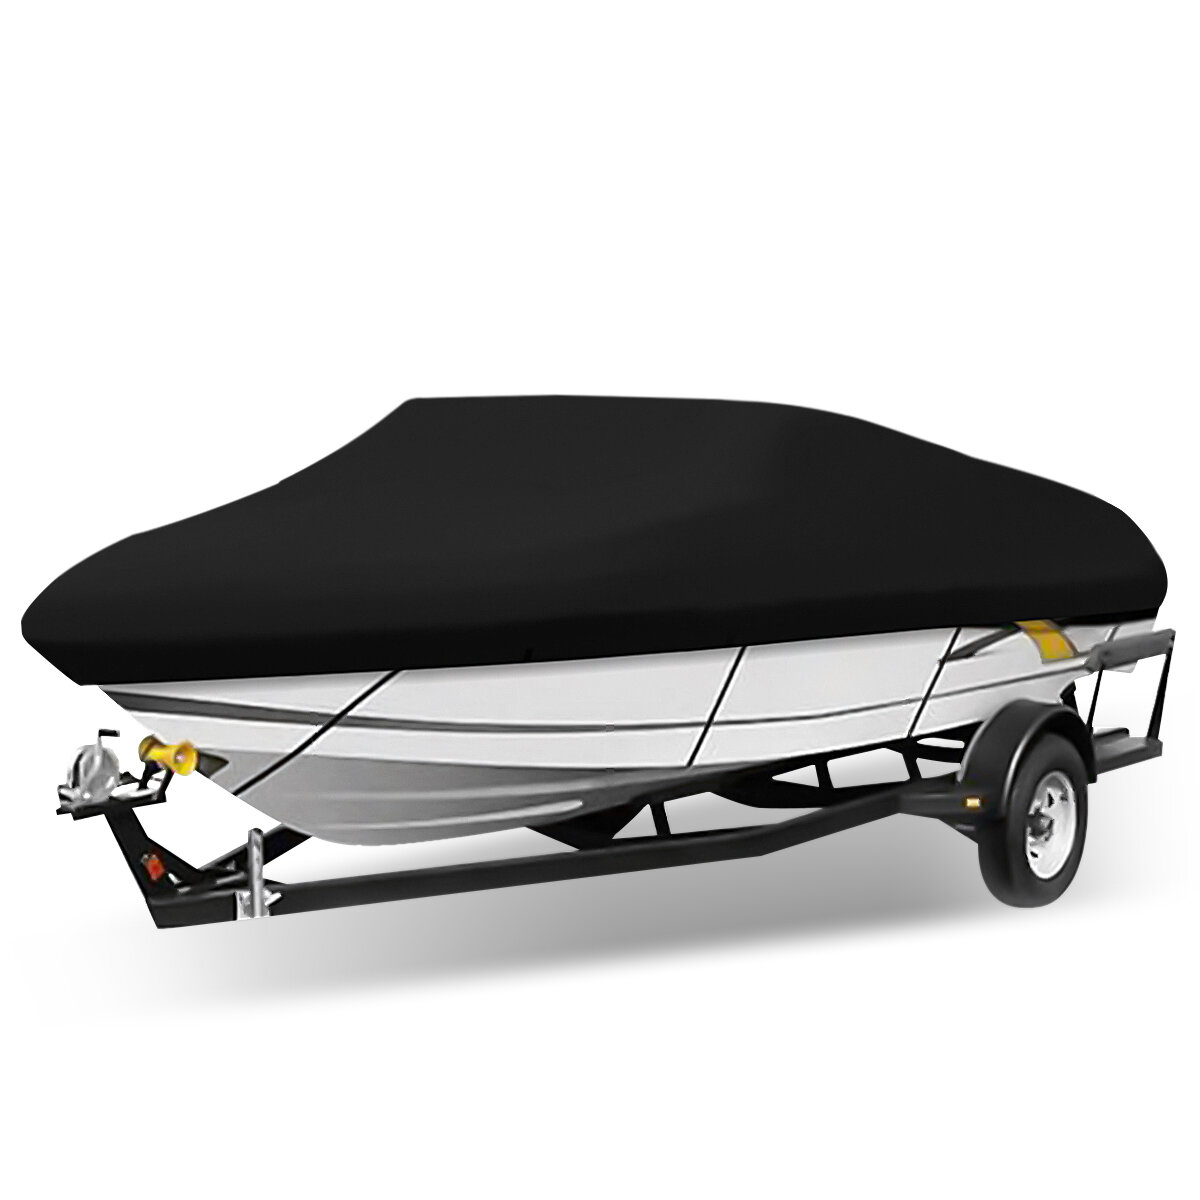 Image of ELuto 11-13ft 14-16ft 17-19ft 20-22ft V-shape Boat Cover Waterproof UV-Protected Heavy Duty 210D Trailerable Canvas Blac